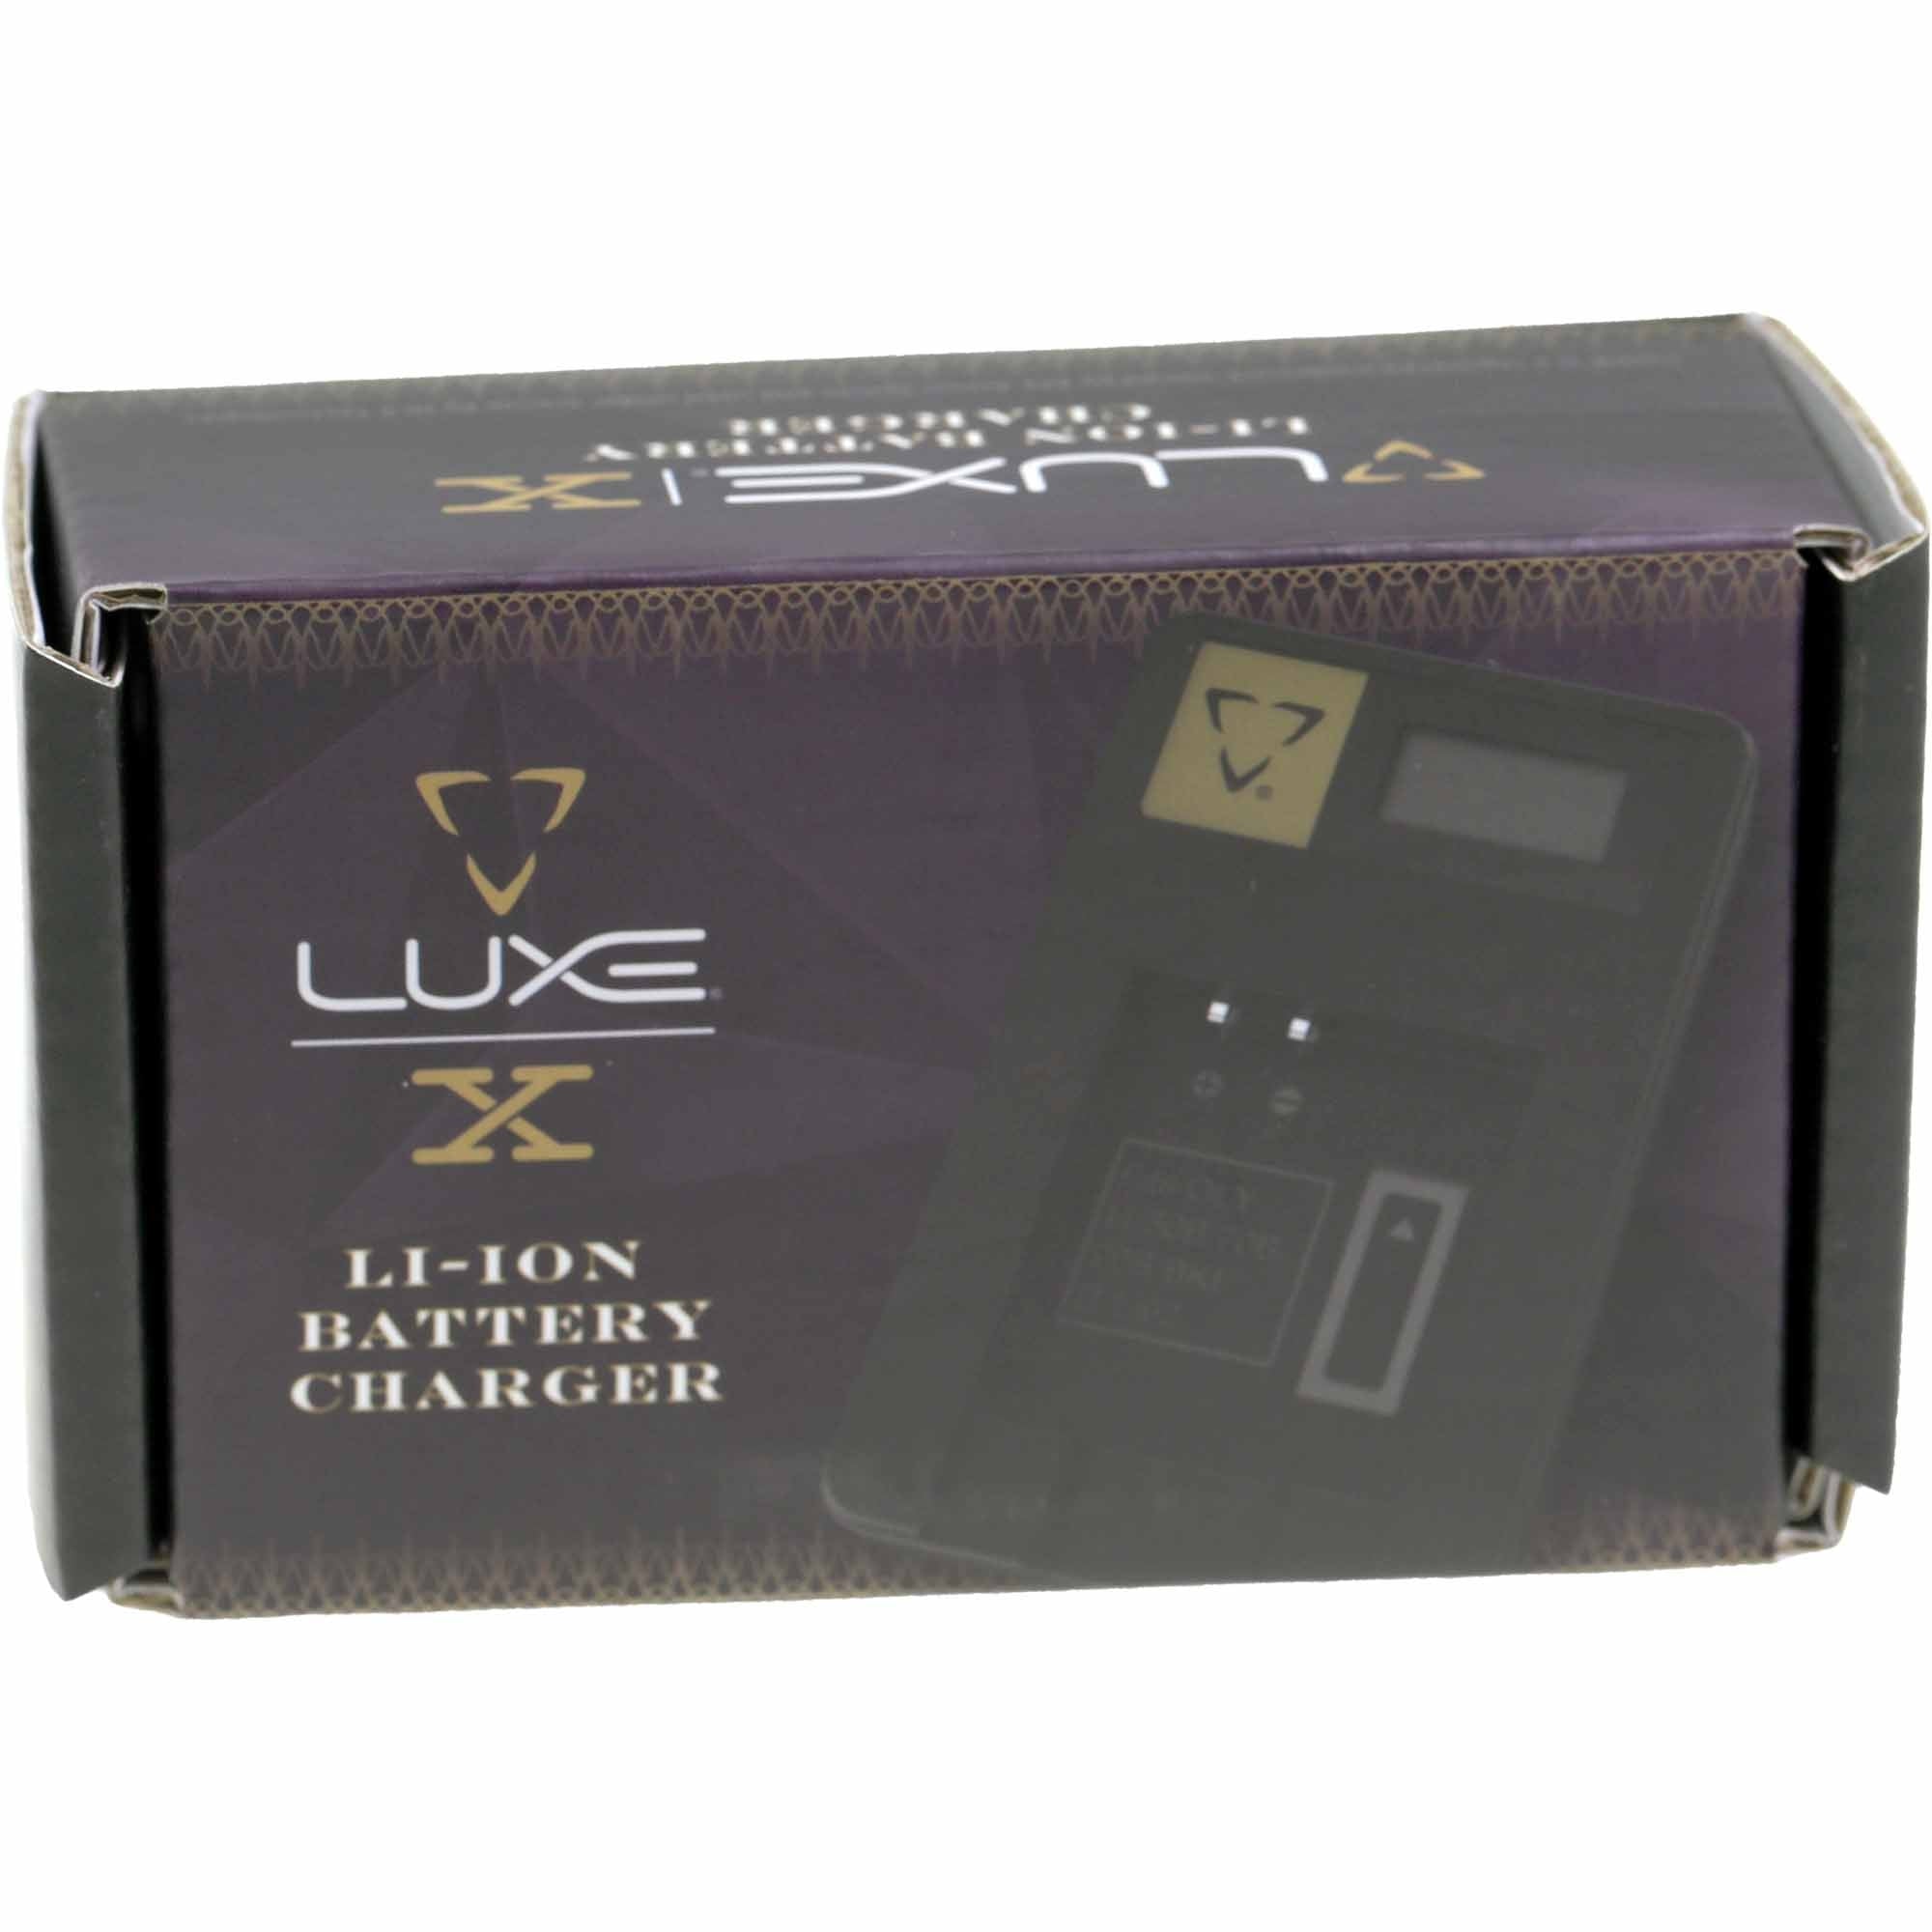 DLX Luxe X External Wall Charger